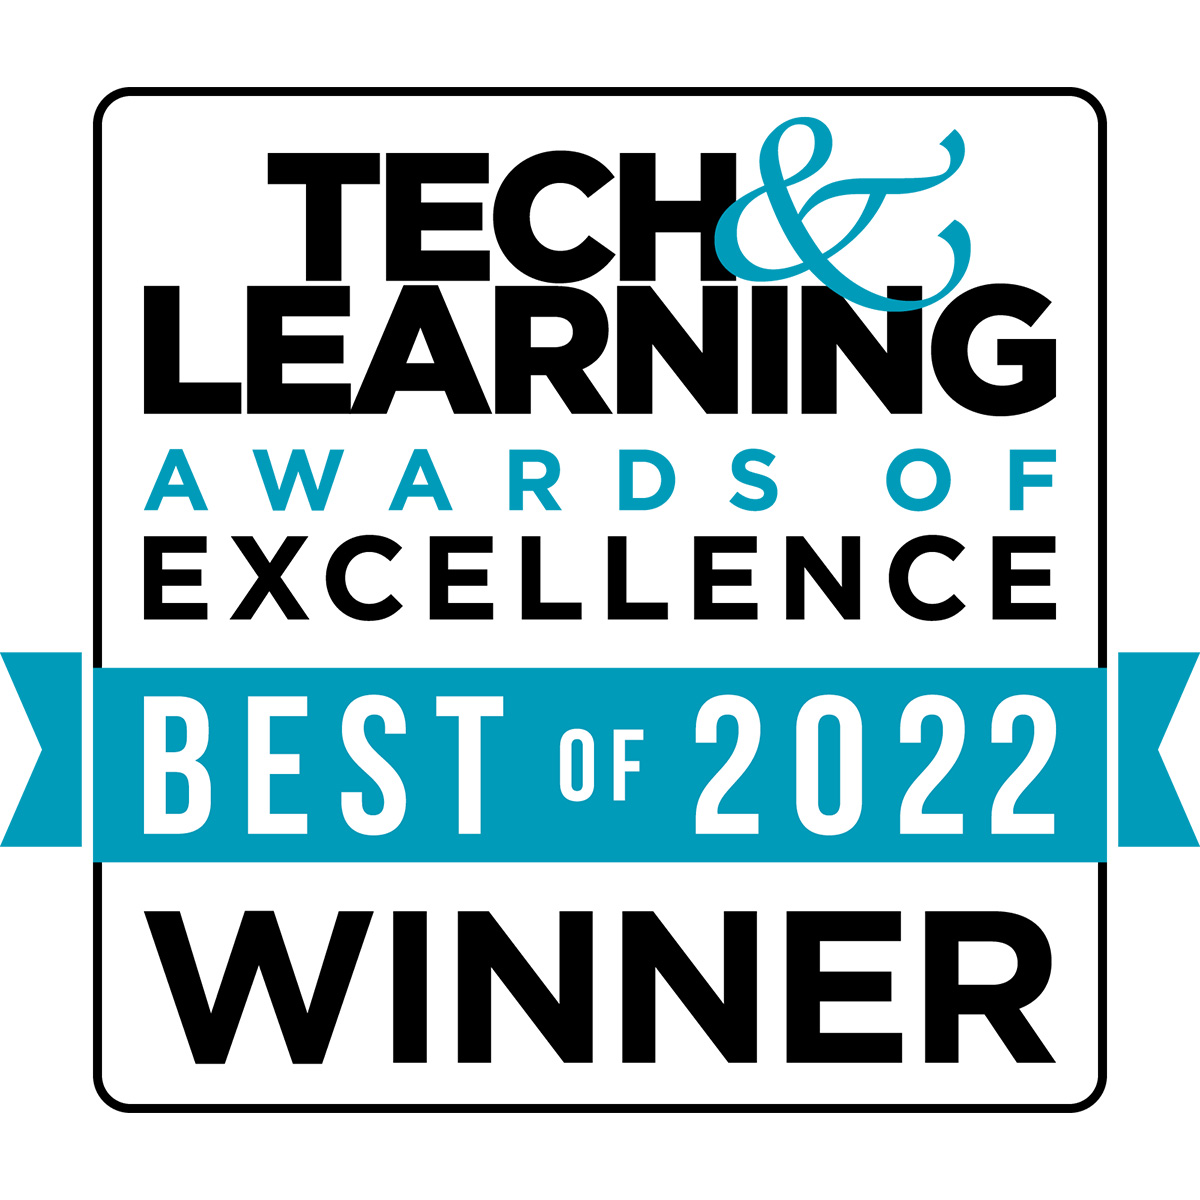 Tech & Learning Awards of Excellence: Best of 2022